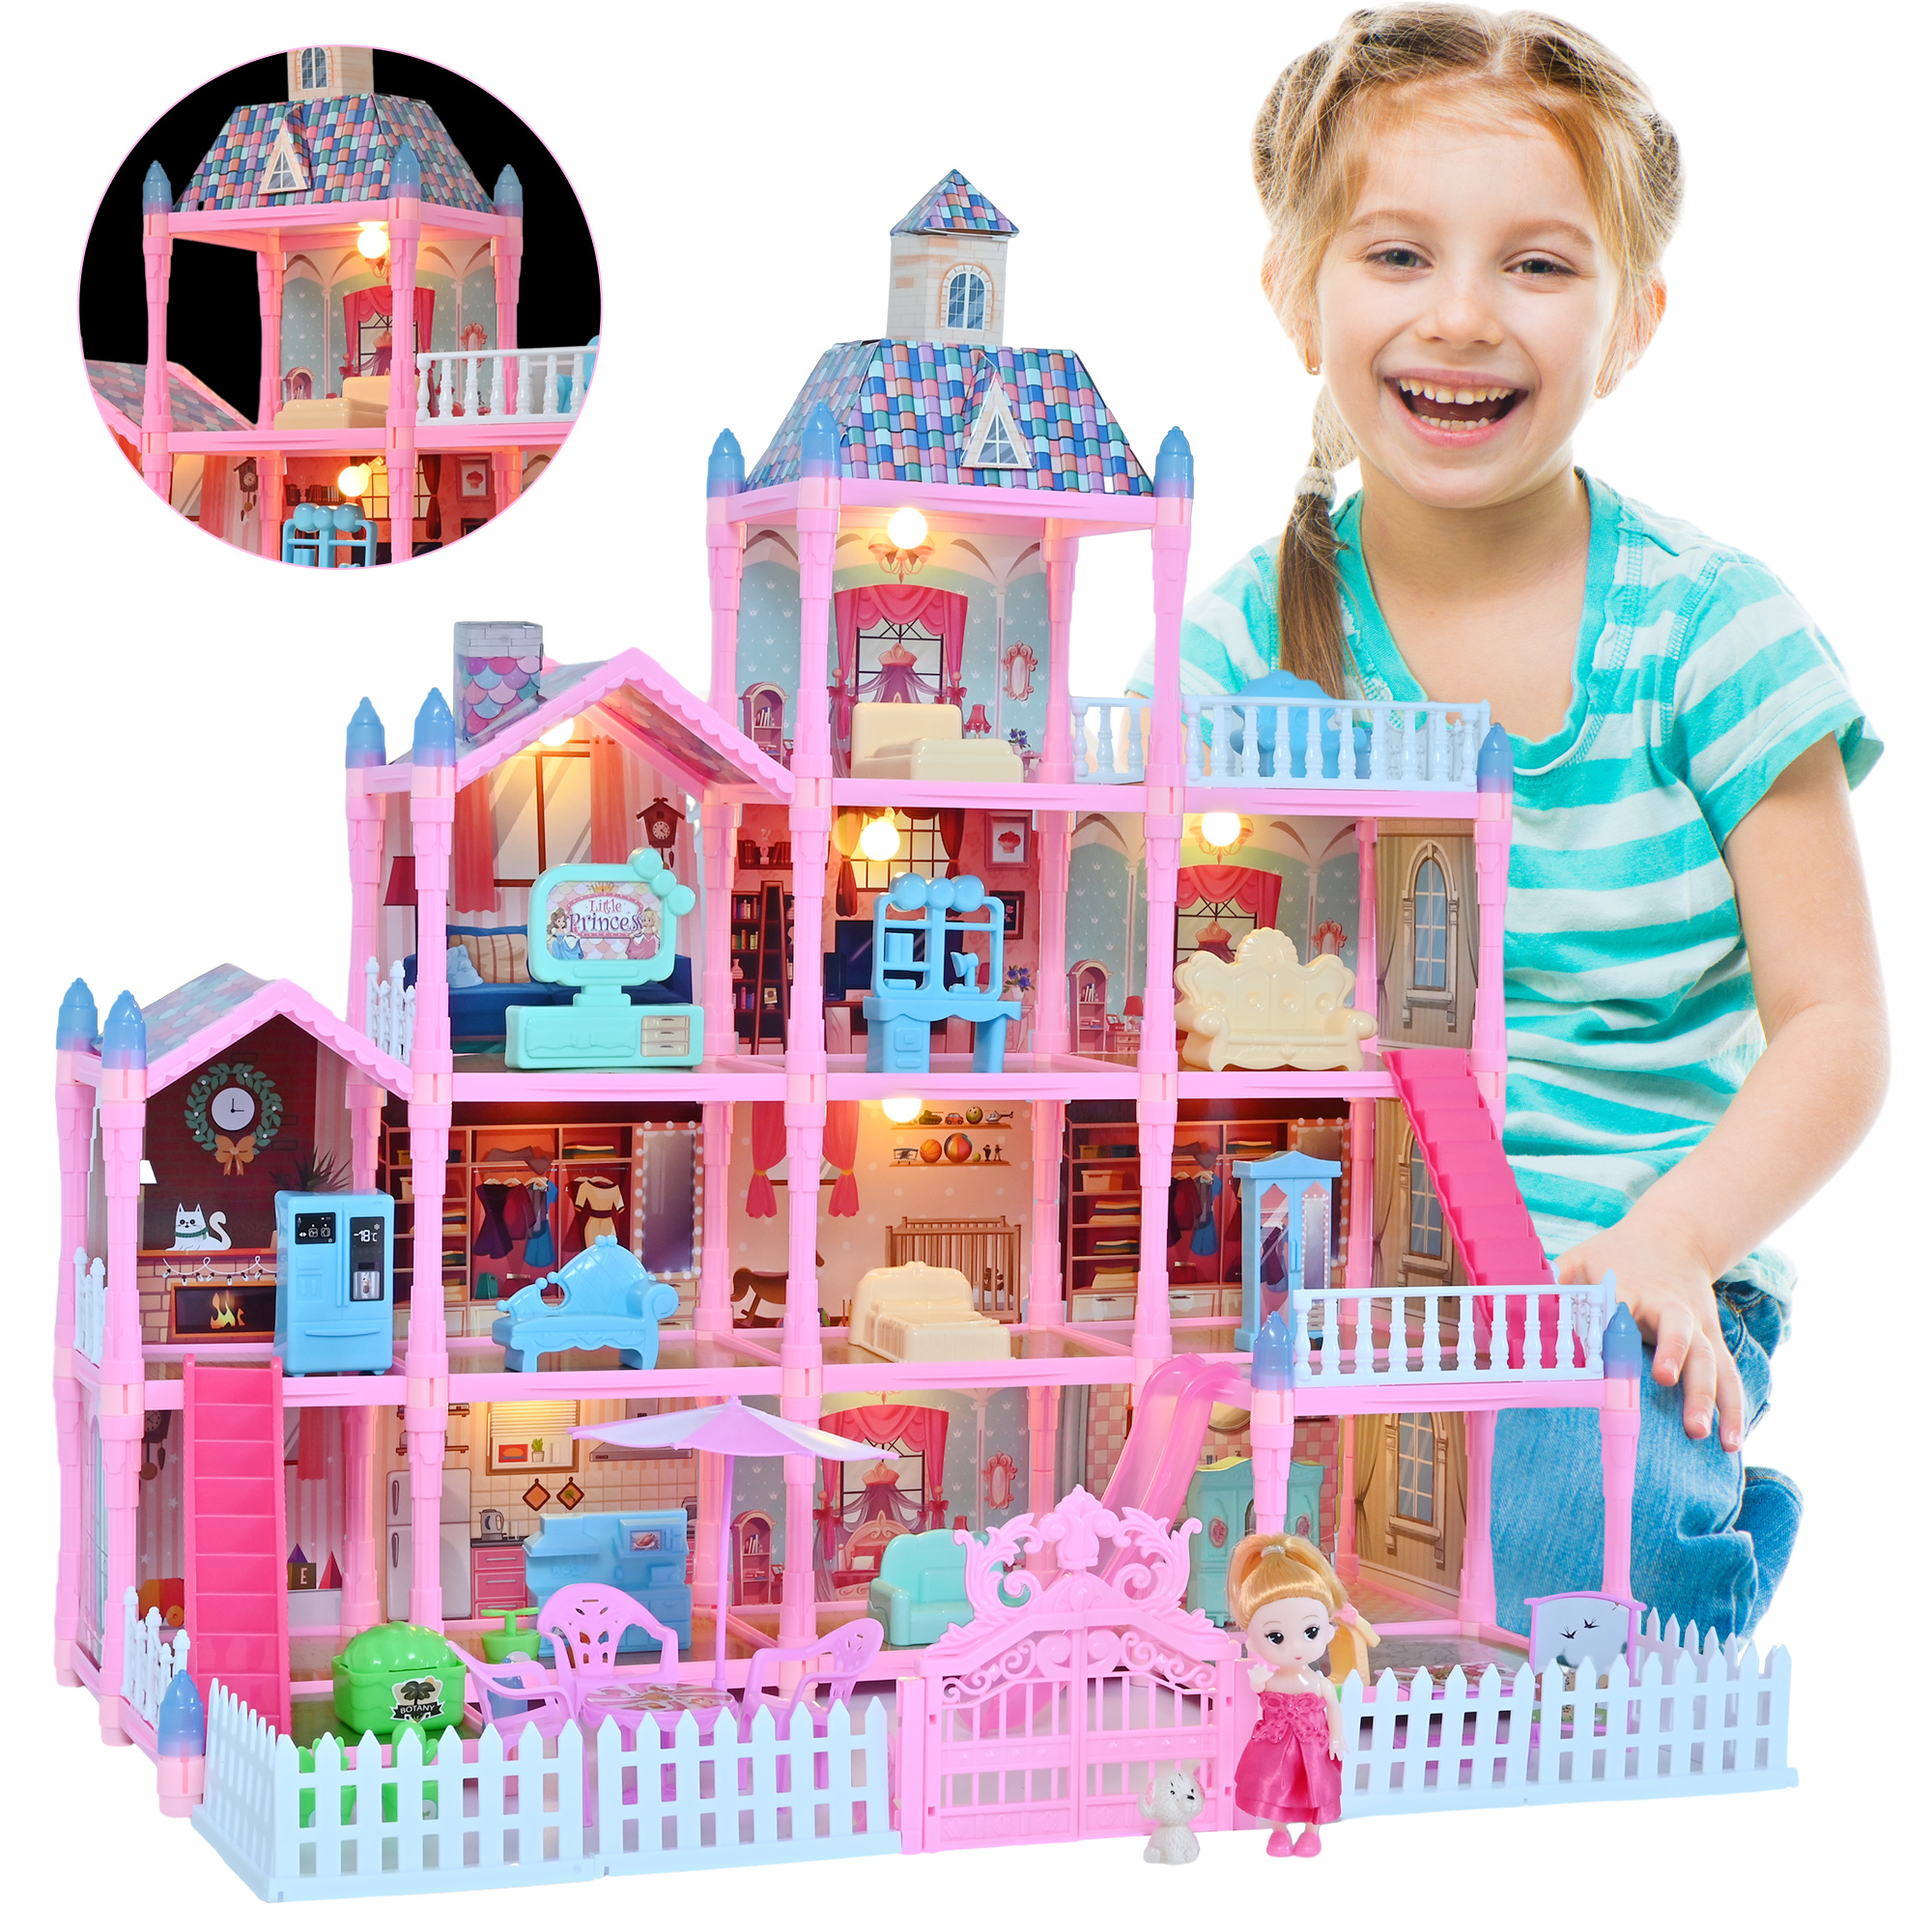 Huge Doll House - 285 PCS Girl Toys Dream Dollhouse 12 Rooms Playhouse with LED Lights Furniture and Accessories, Big Doll House for Princess Age 3-10 - image 1 of 7